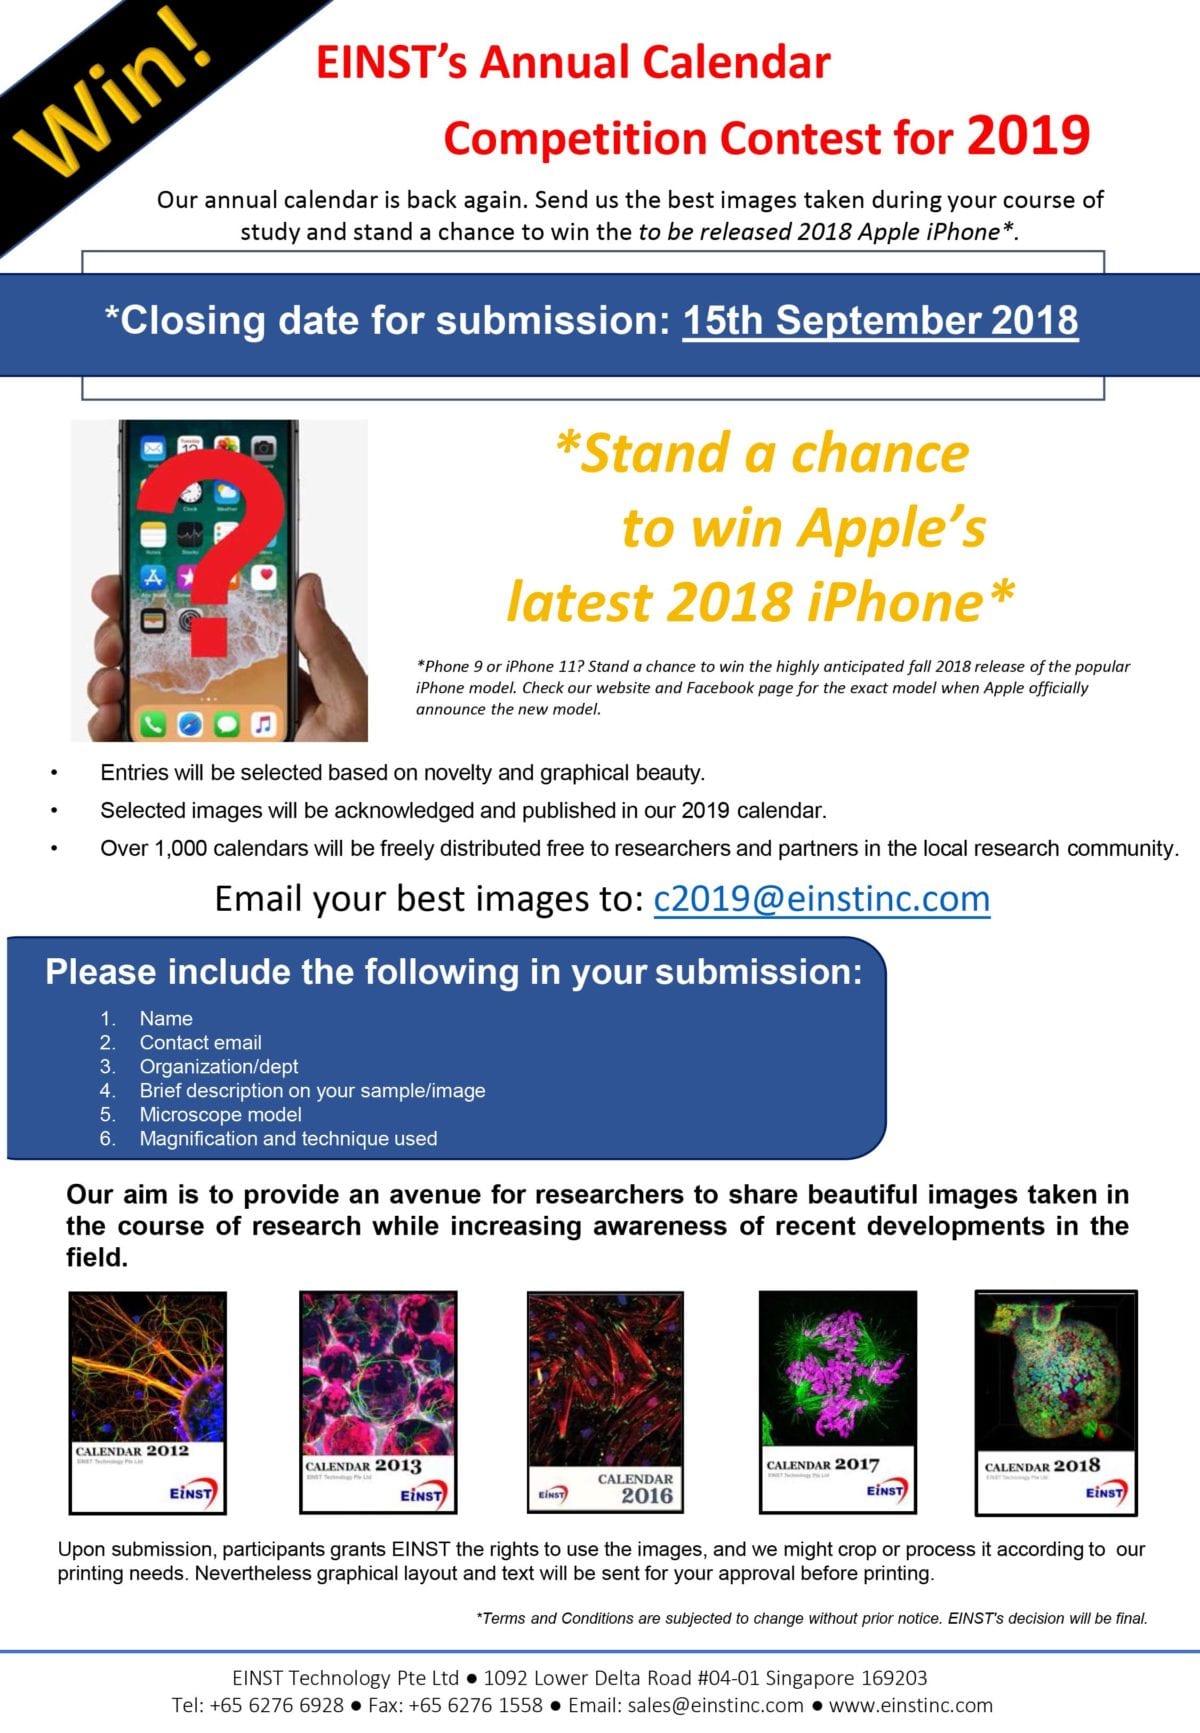 EINST’s Annual Calendar Competition Contest for 2019